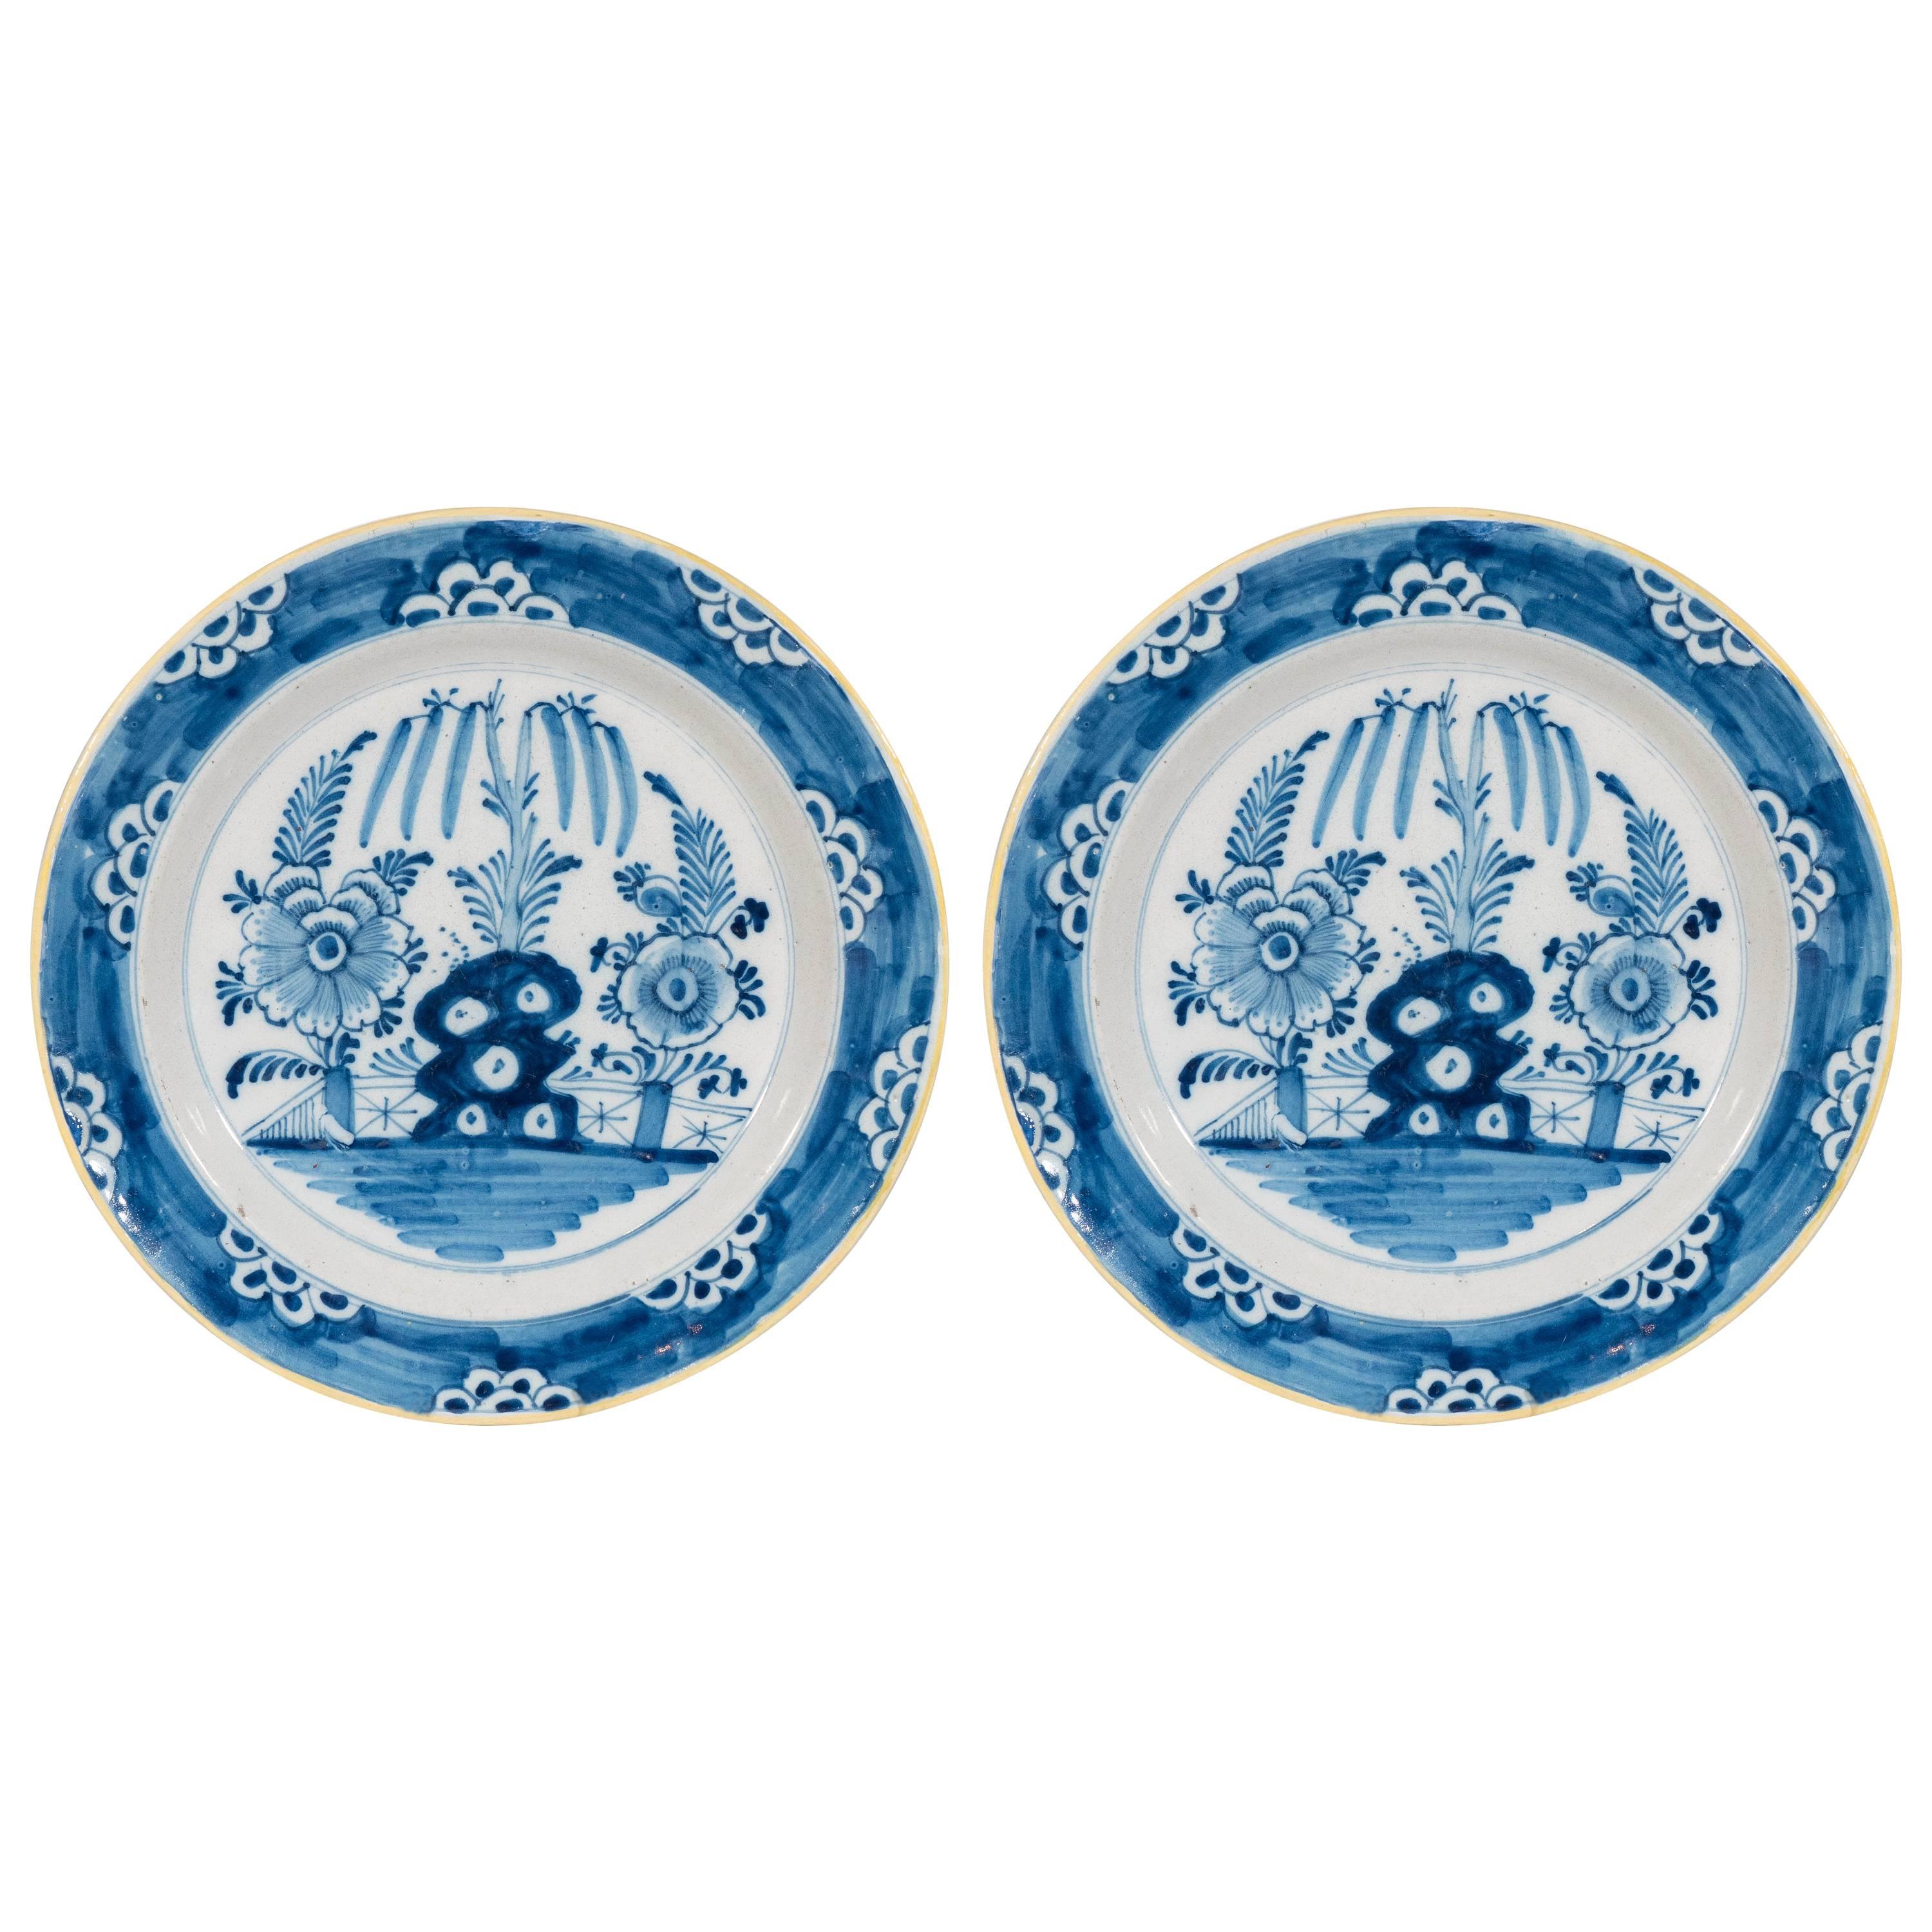 Antique Delft  Blue and White Chargers circa 1770